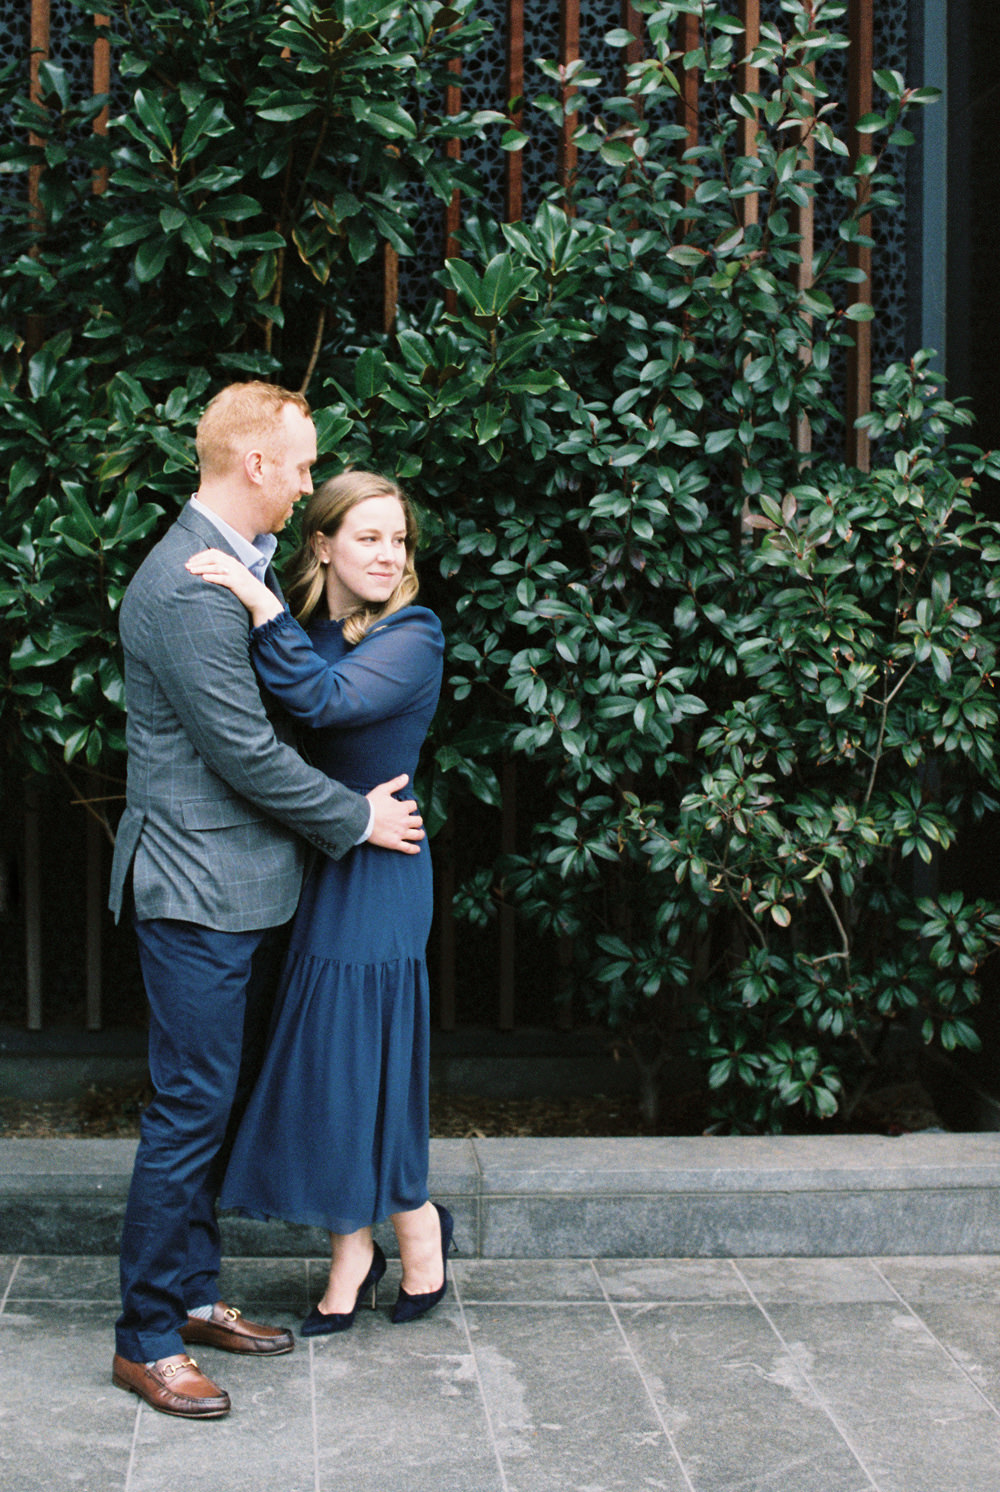 prospect heights brooklyn engagement session film photography by Mary Dougherty